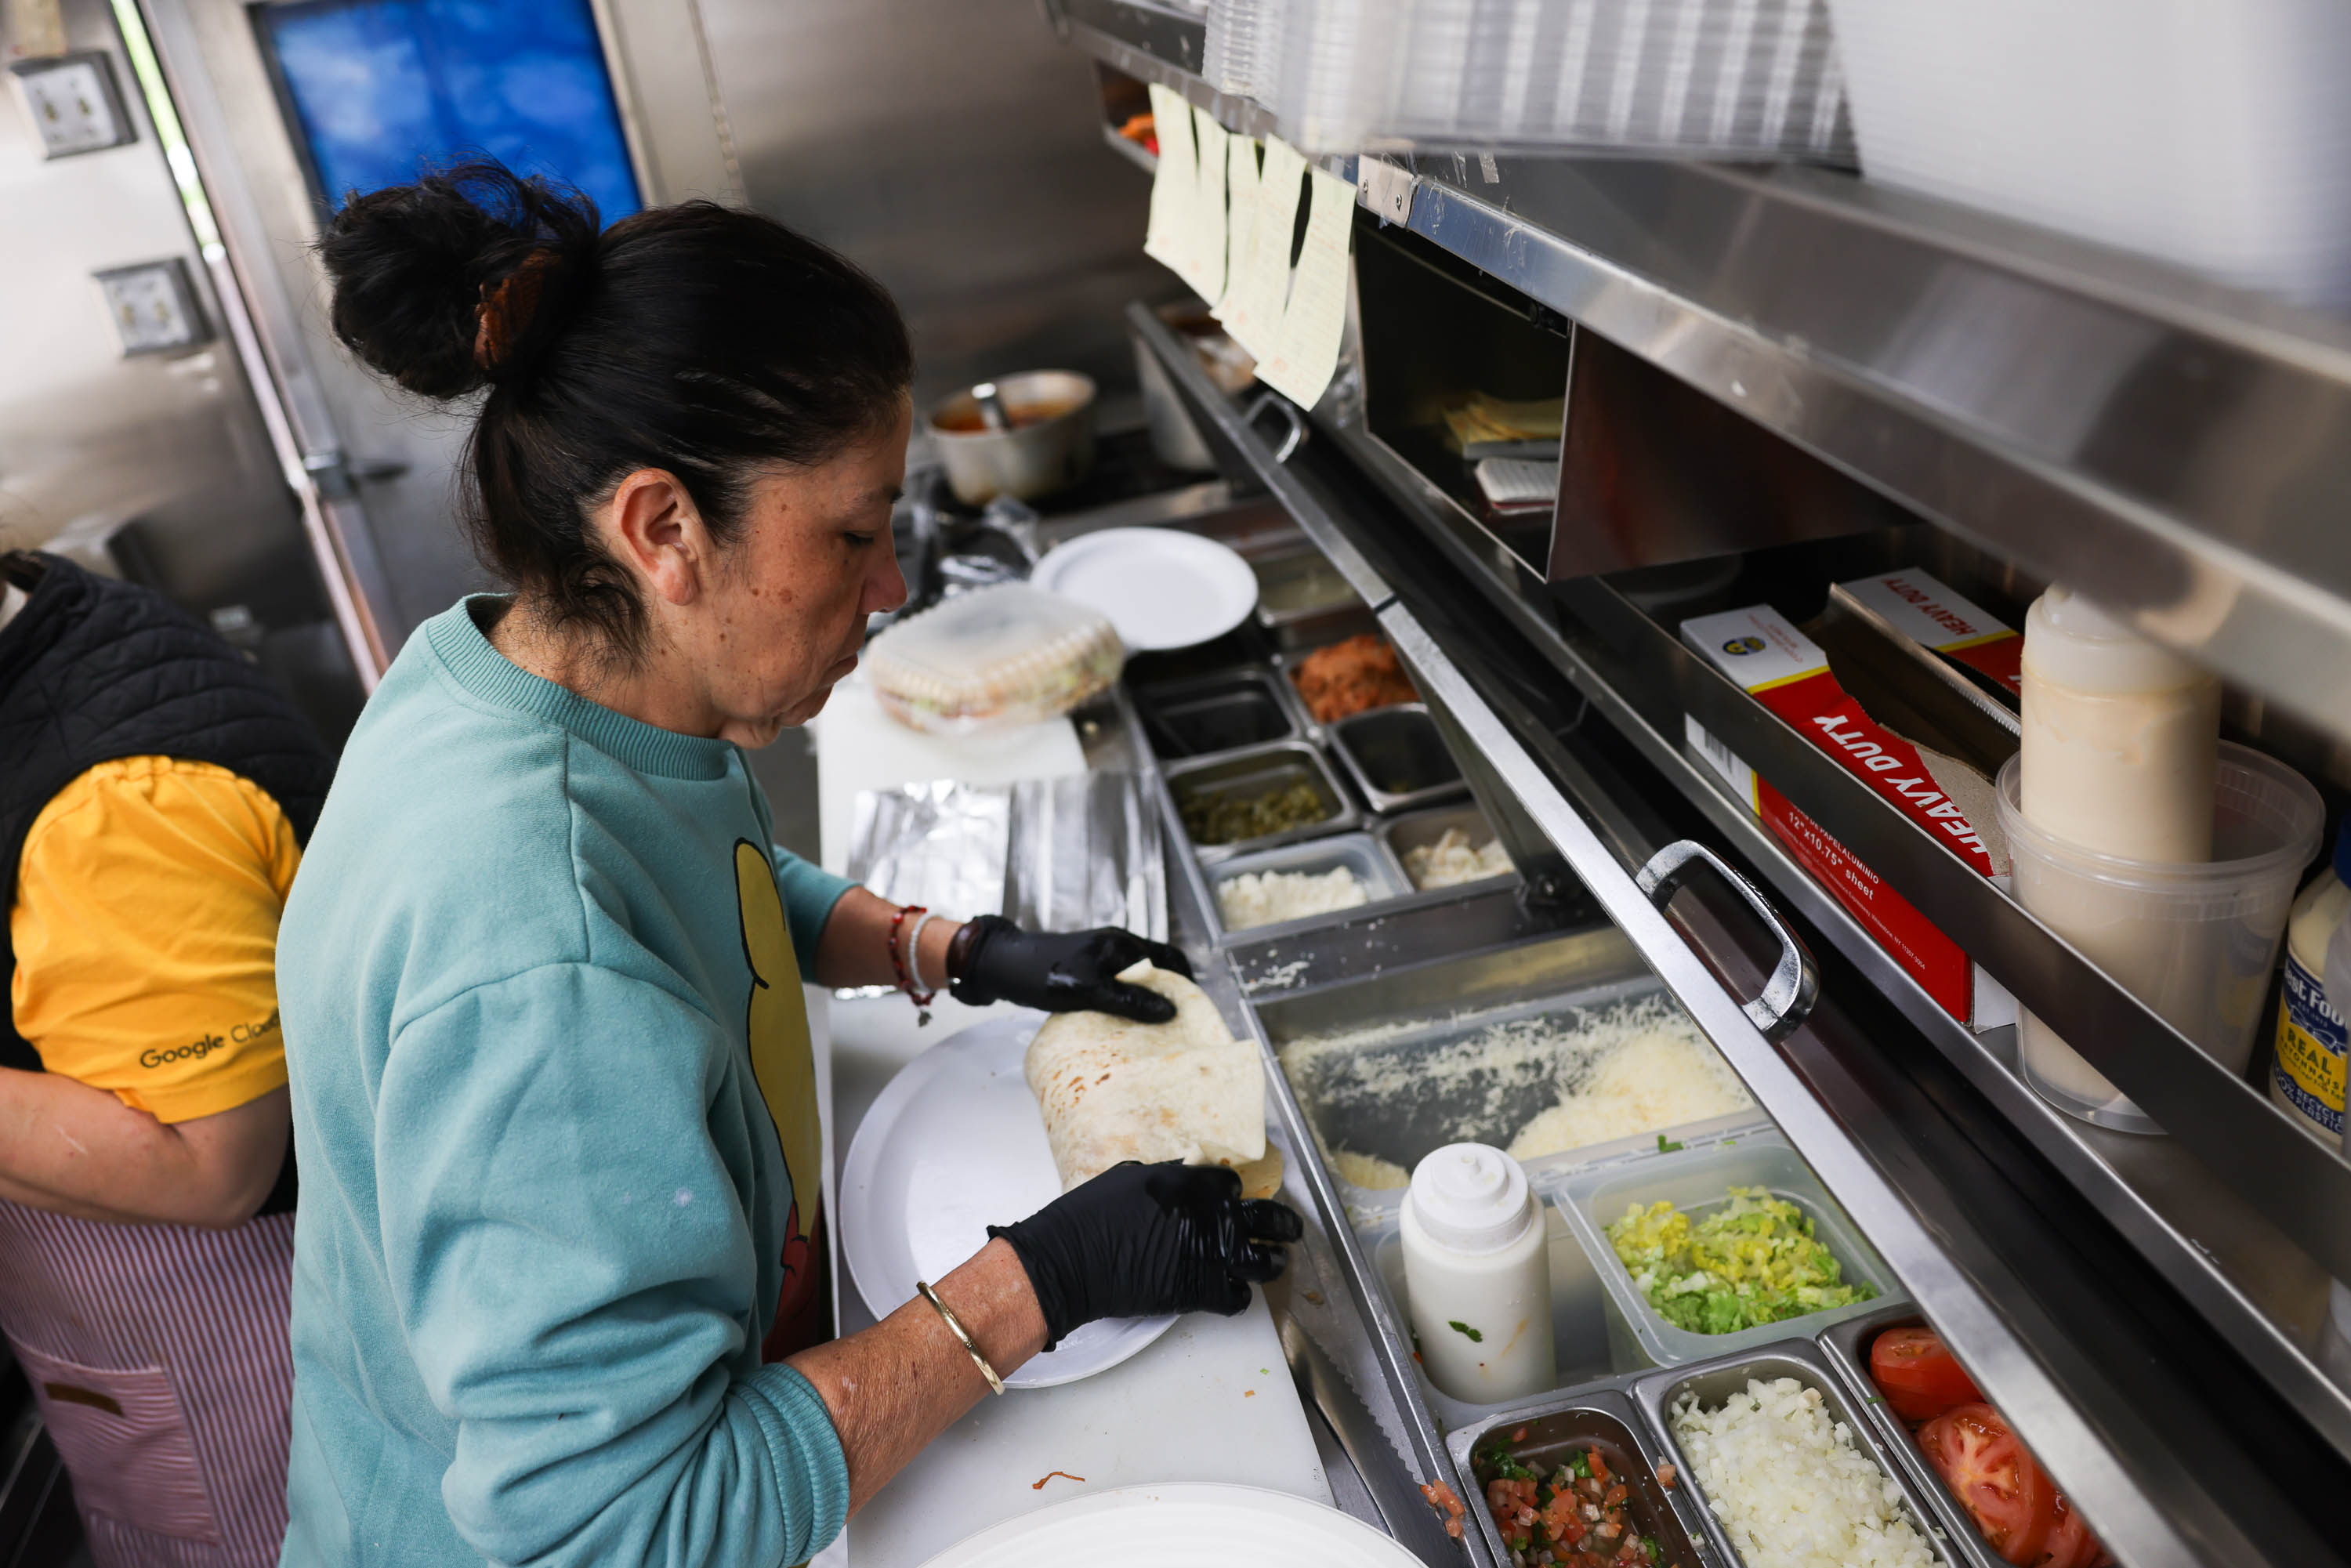 A person is making a burrito in a kitchen with various ingredients on display.